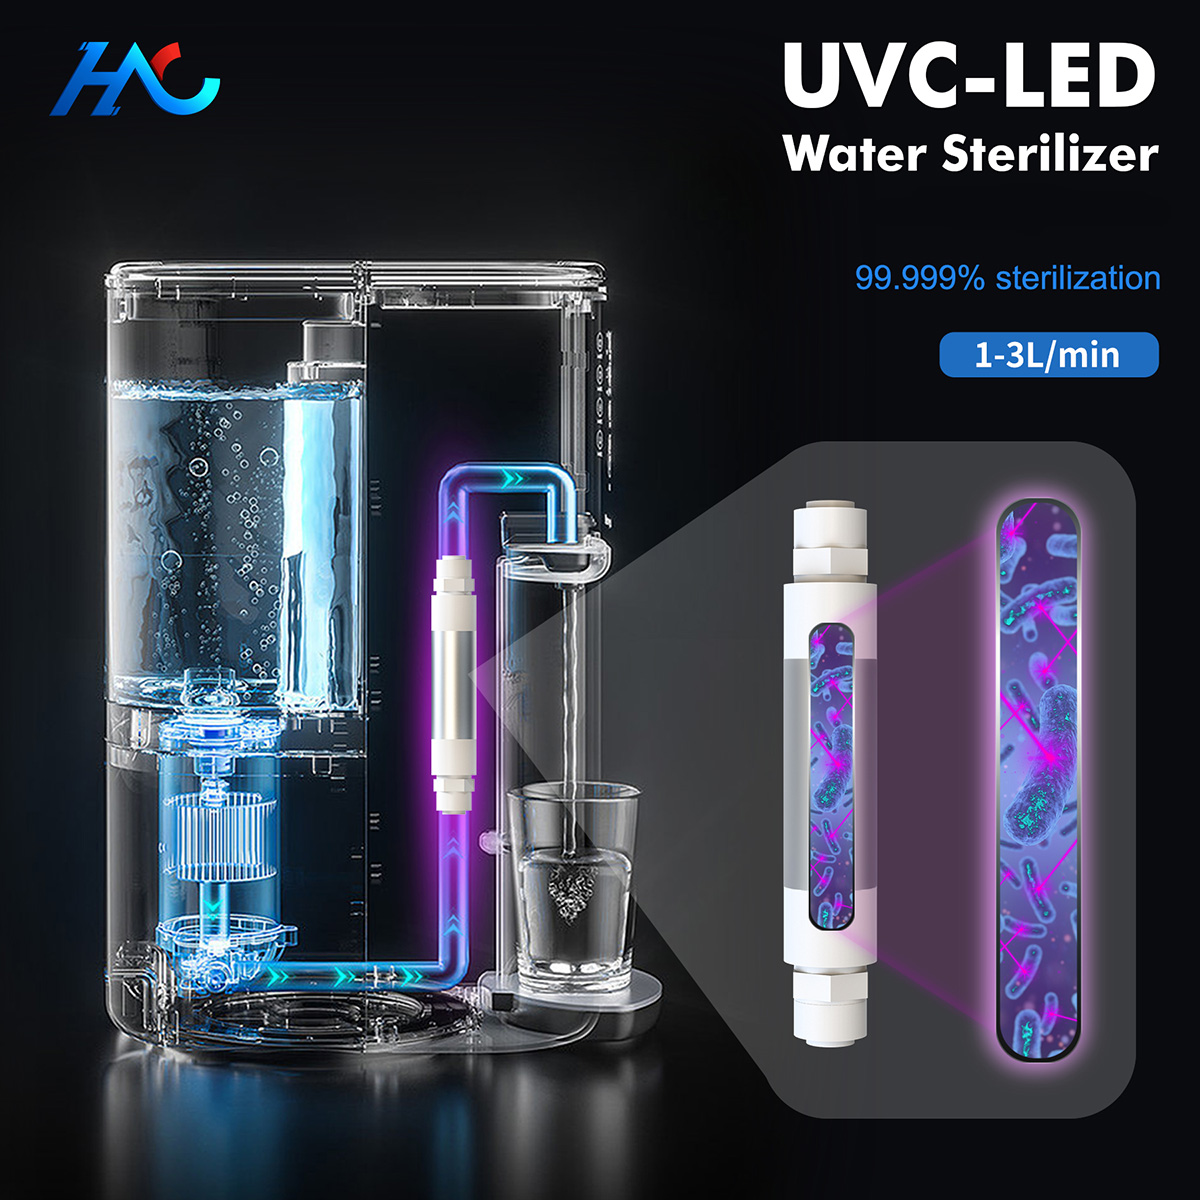 MINI UVC LED Water Sterilizer for Water Dispensers. Enjoy 0.2 second "0" bacteria pure drinking water.